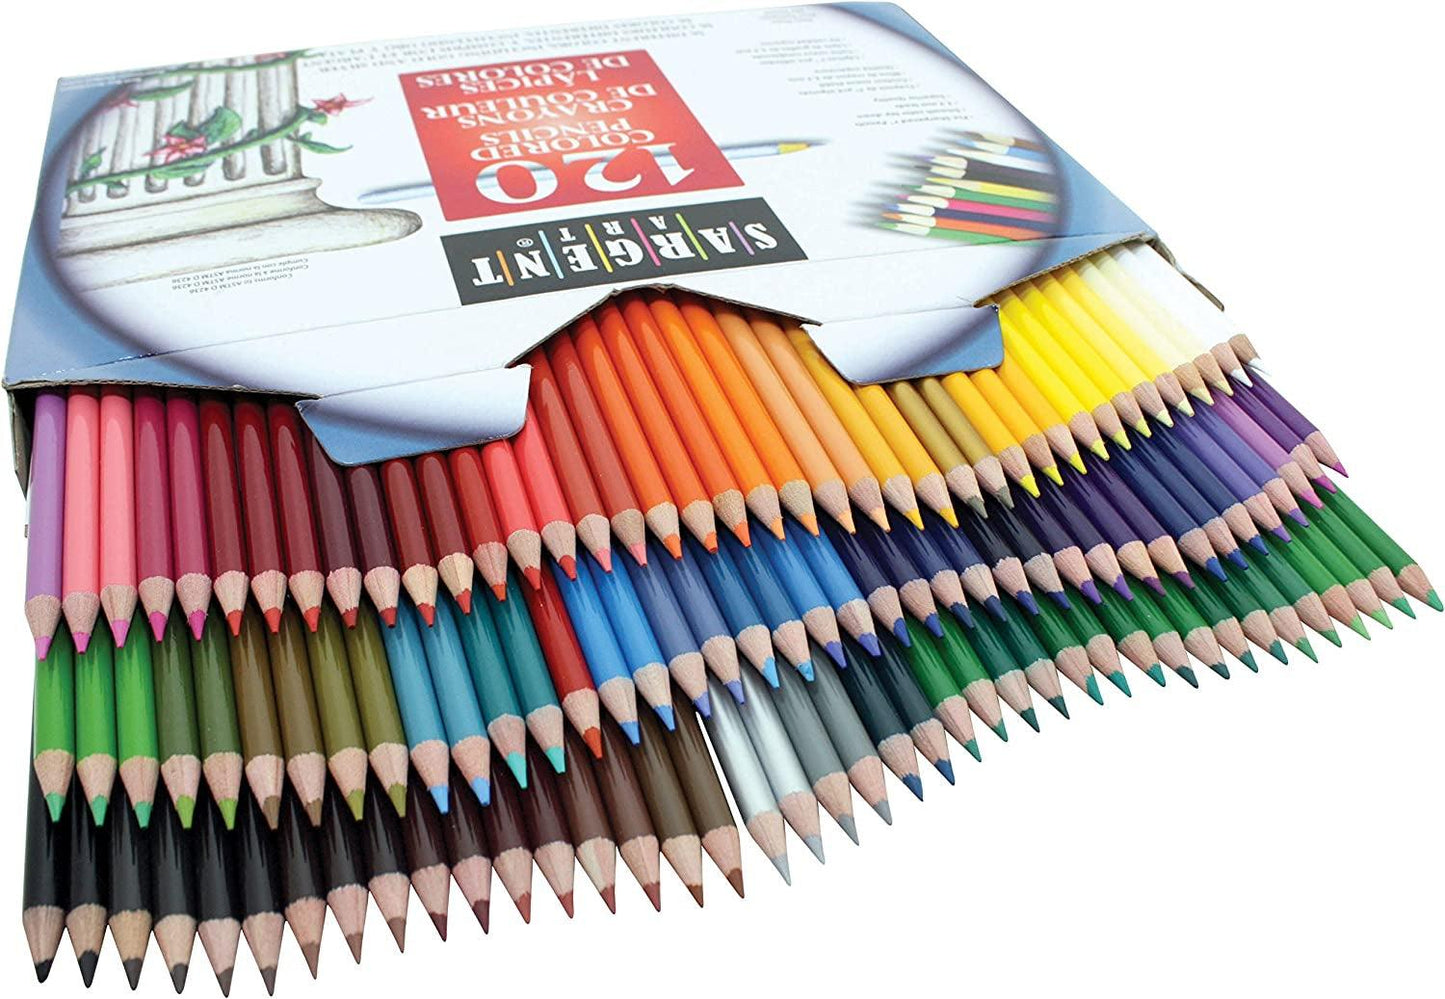 120 Piece Assortment Colored Pencils, Writing, Drawing, Illustration, 56 Colors - WoodArtSupply